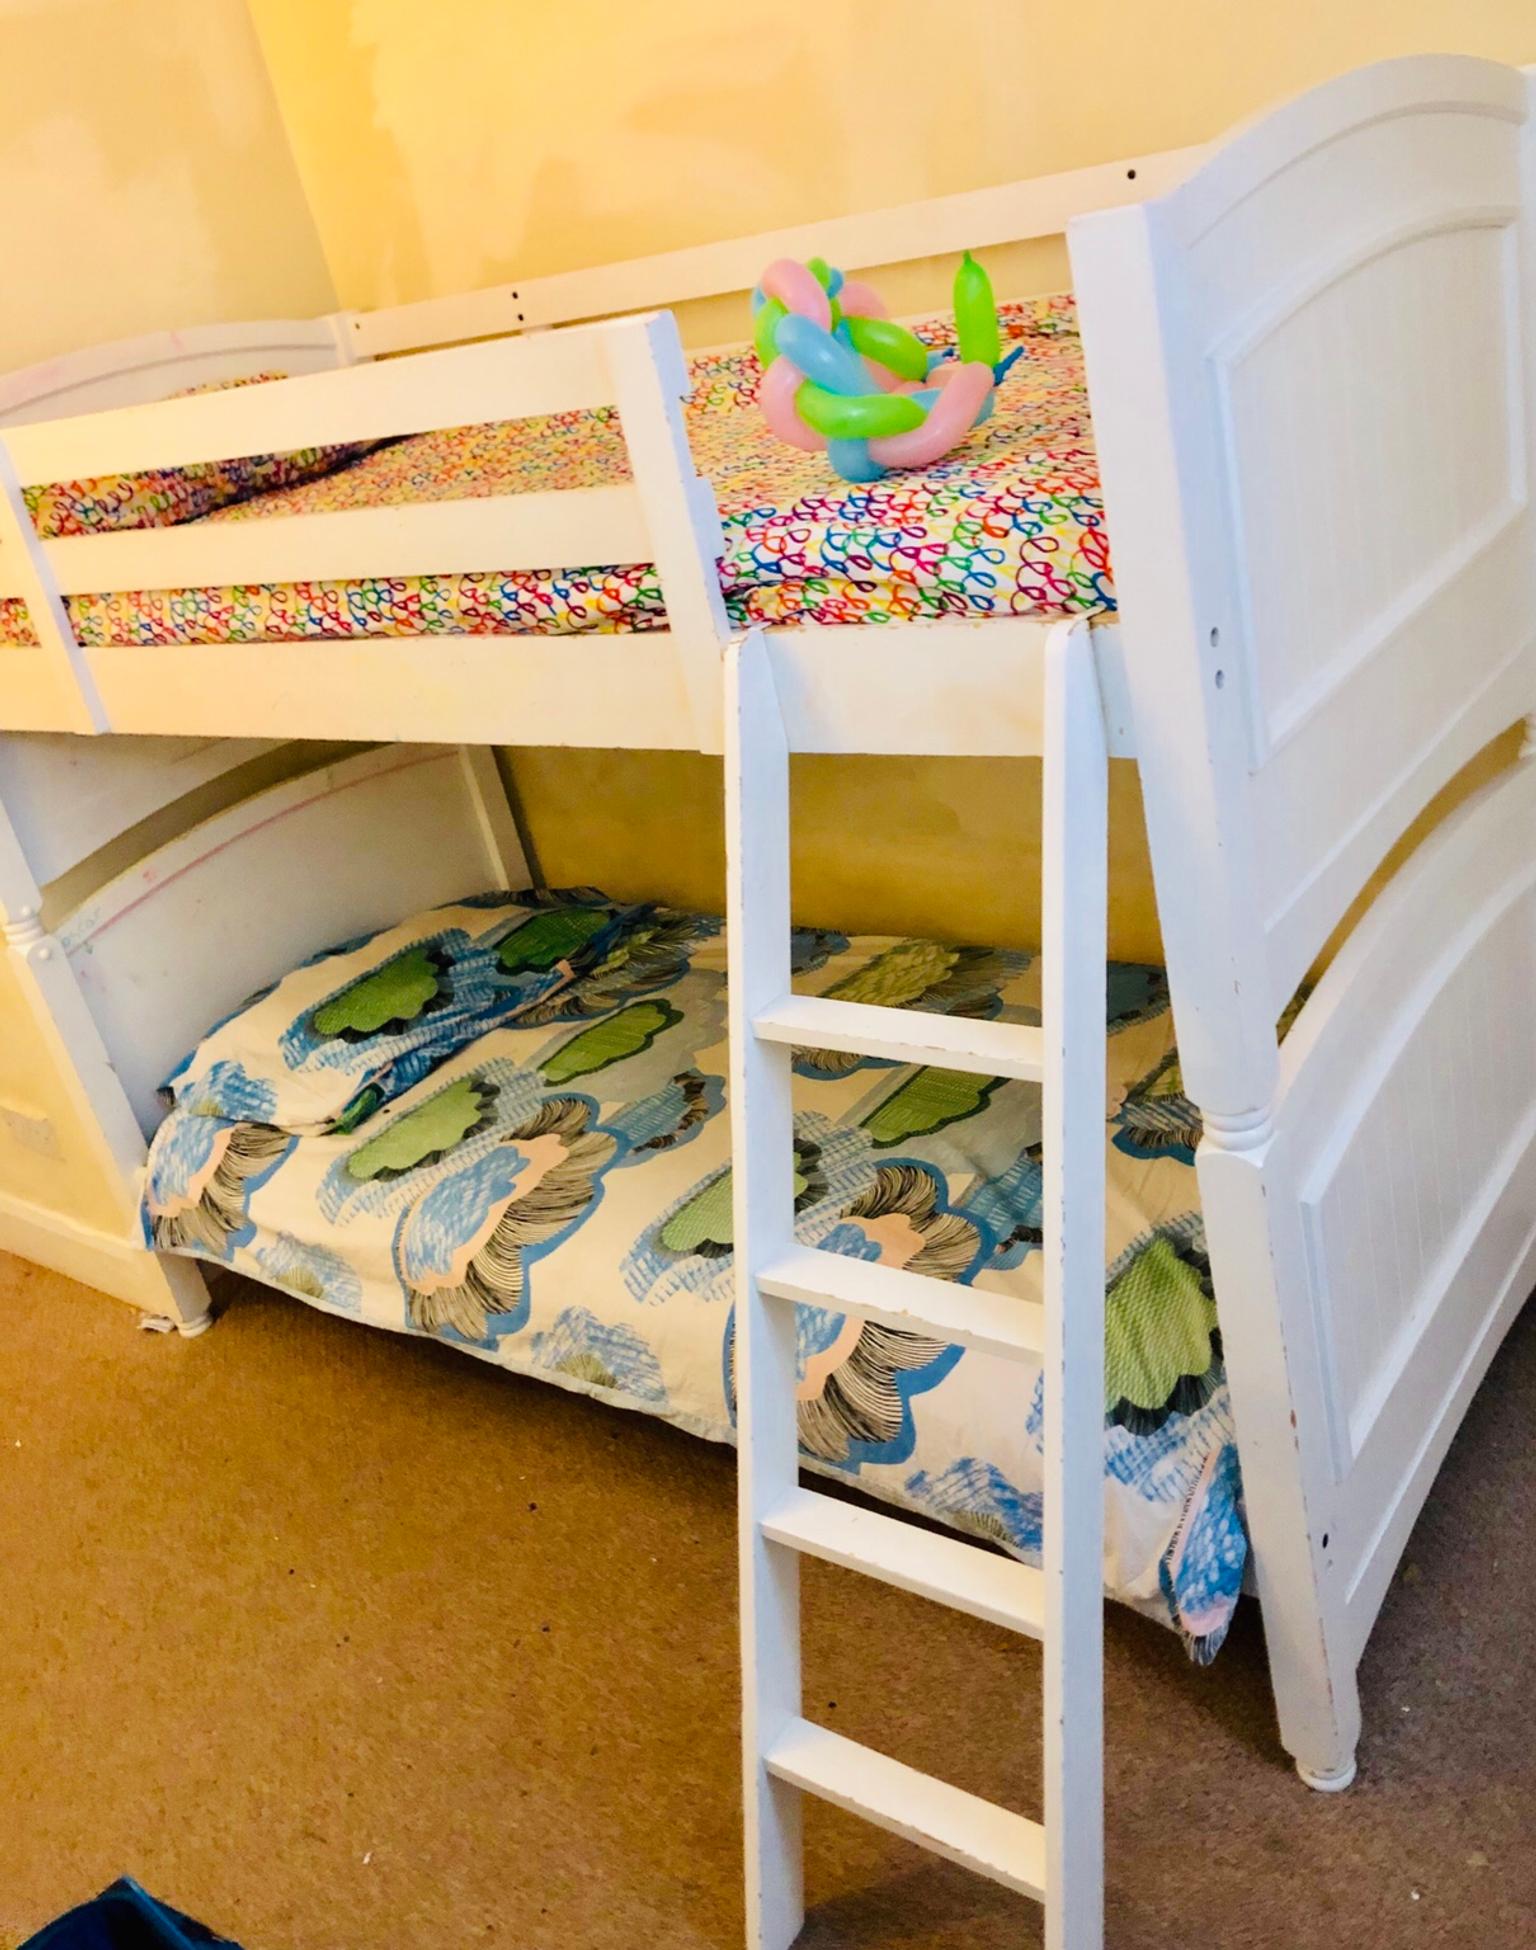 Costco Cot Bunk Beds Free Delivery, Bunk Bed With Stairs Costco